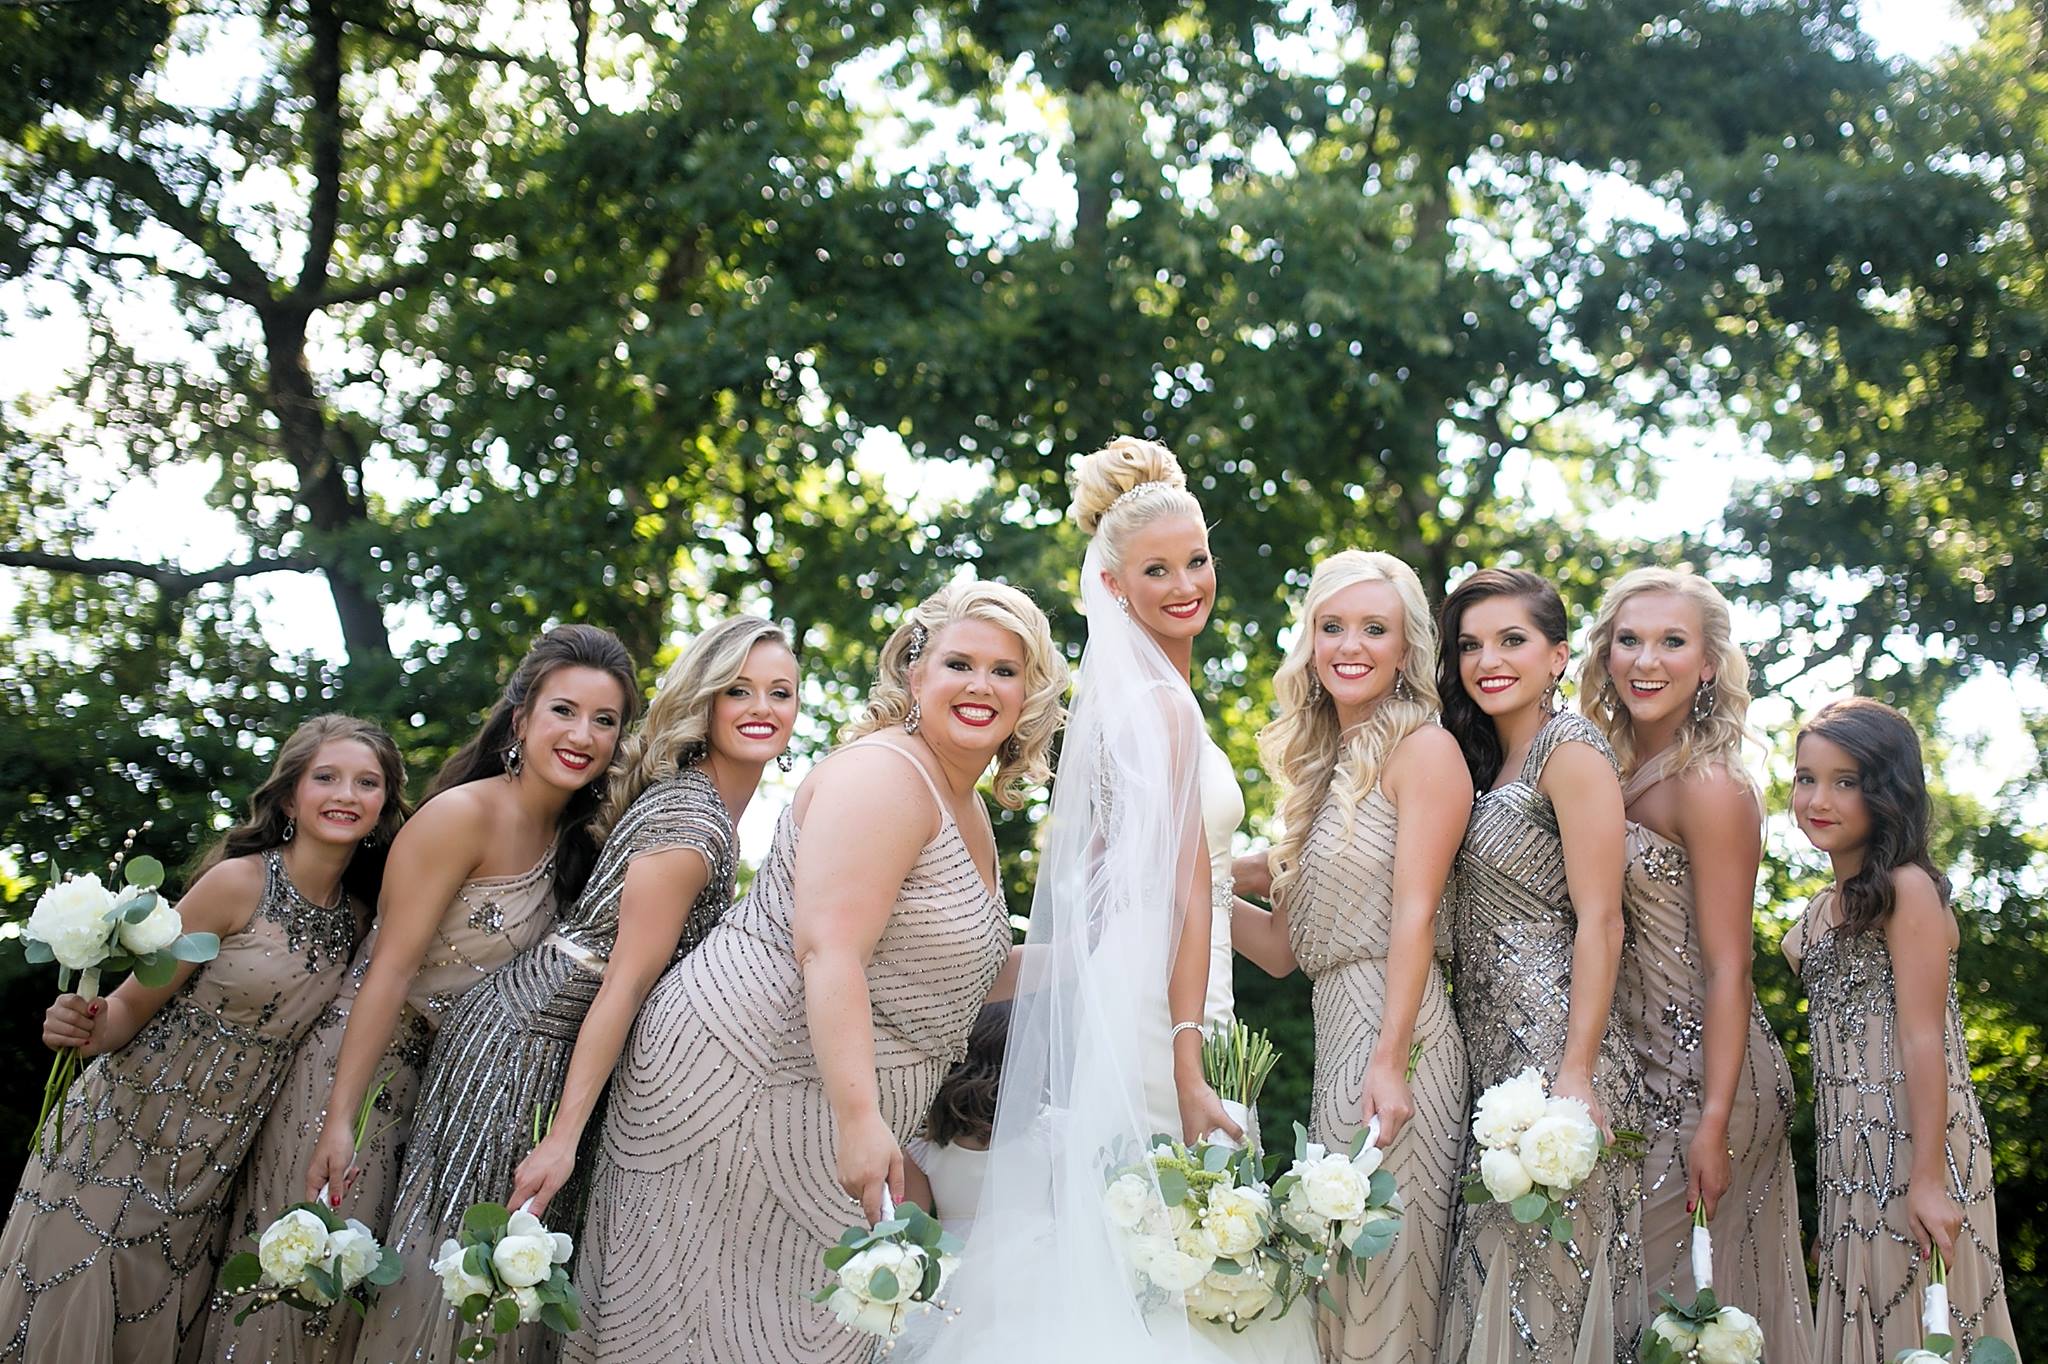 Wedding Wednesday Introducing Bridal Party | love 'n' labels www.lovenlabels.com